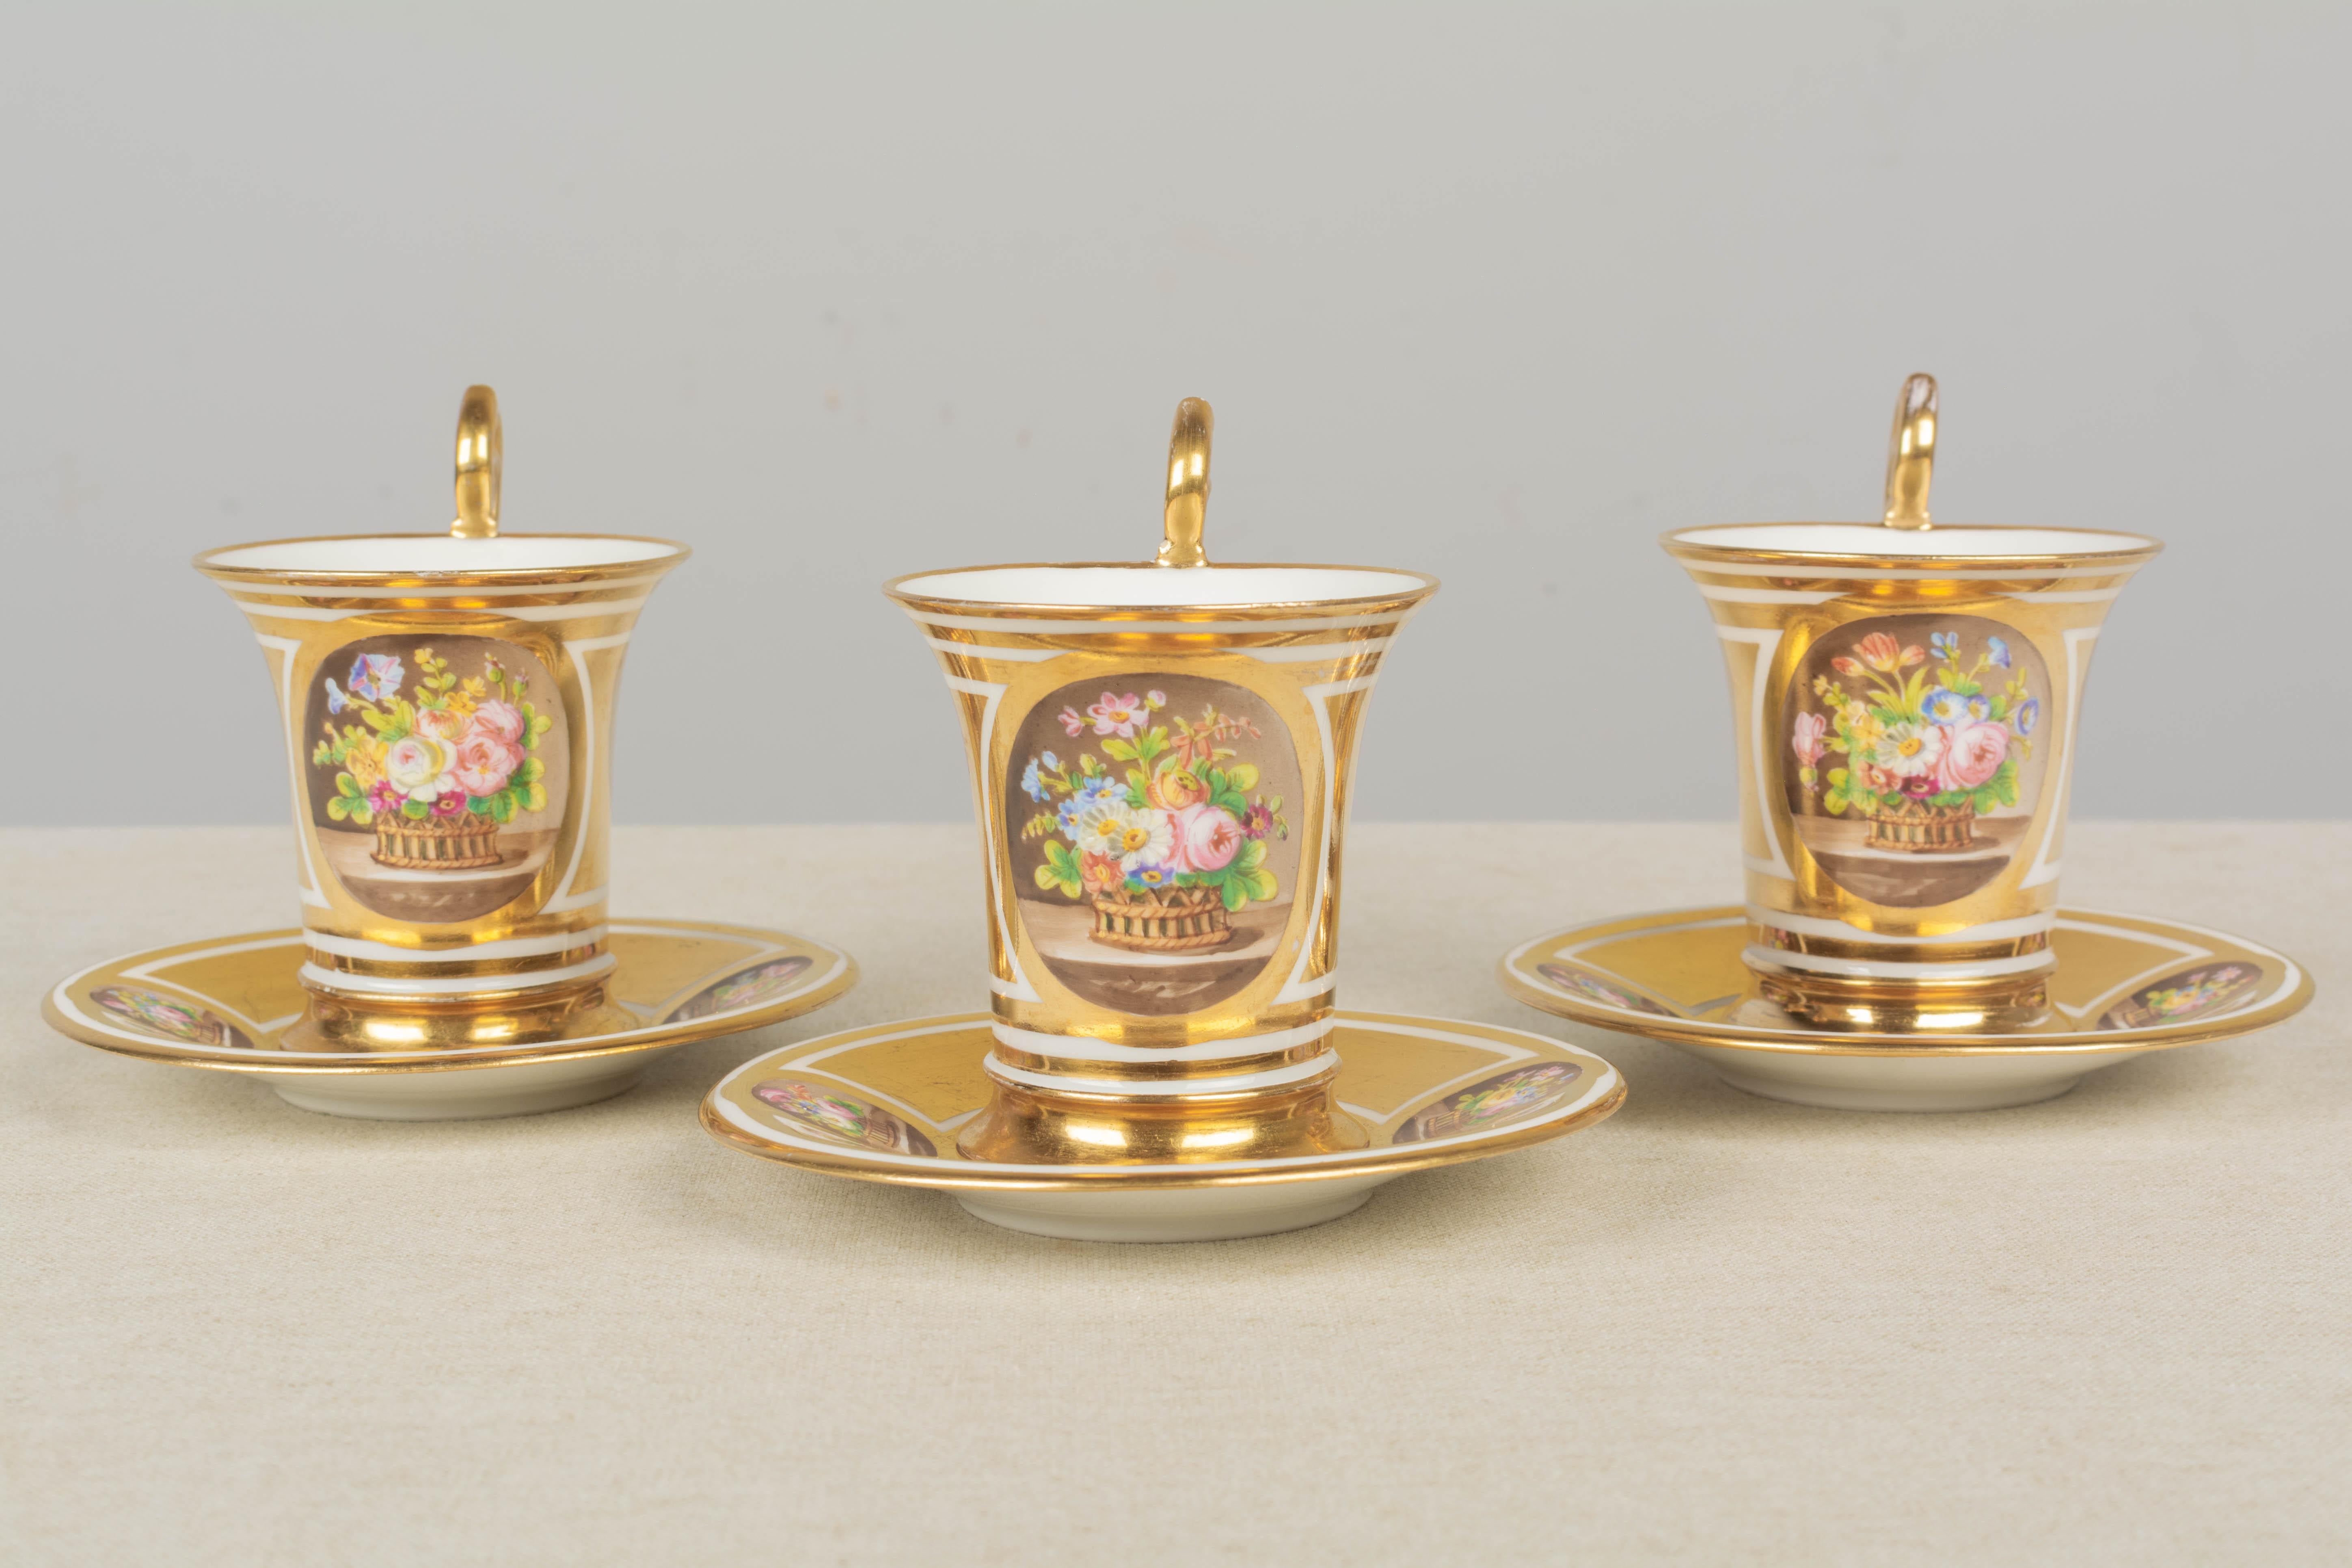 19th Century French Sèvres Gilt Porcelain Cup & Saucer, Set of 3 In Good Condition For Sale In Winter Park, FL